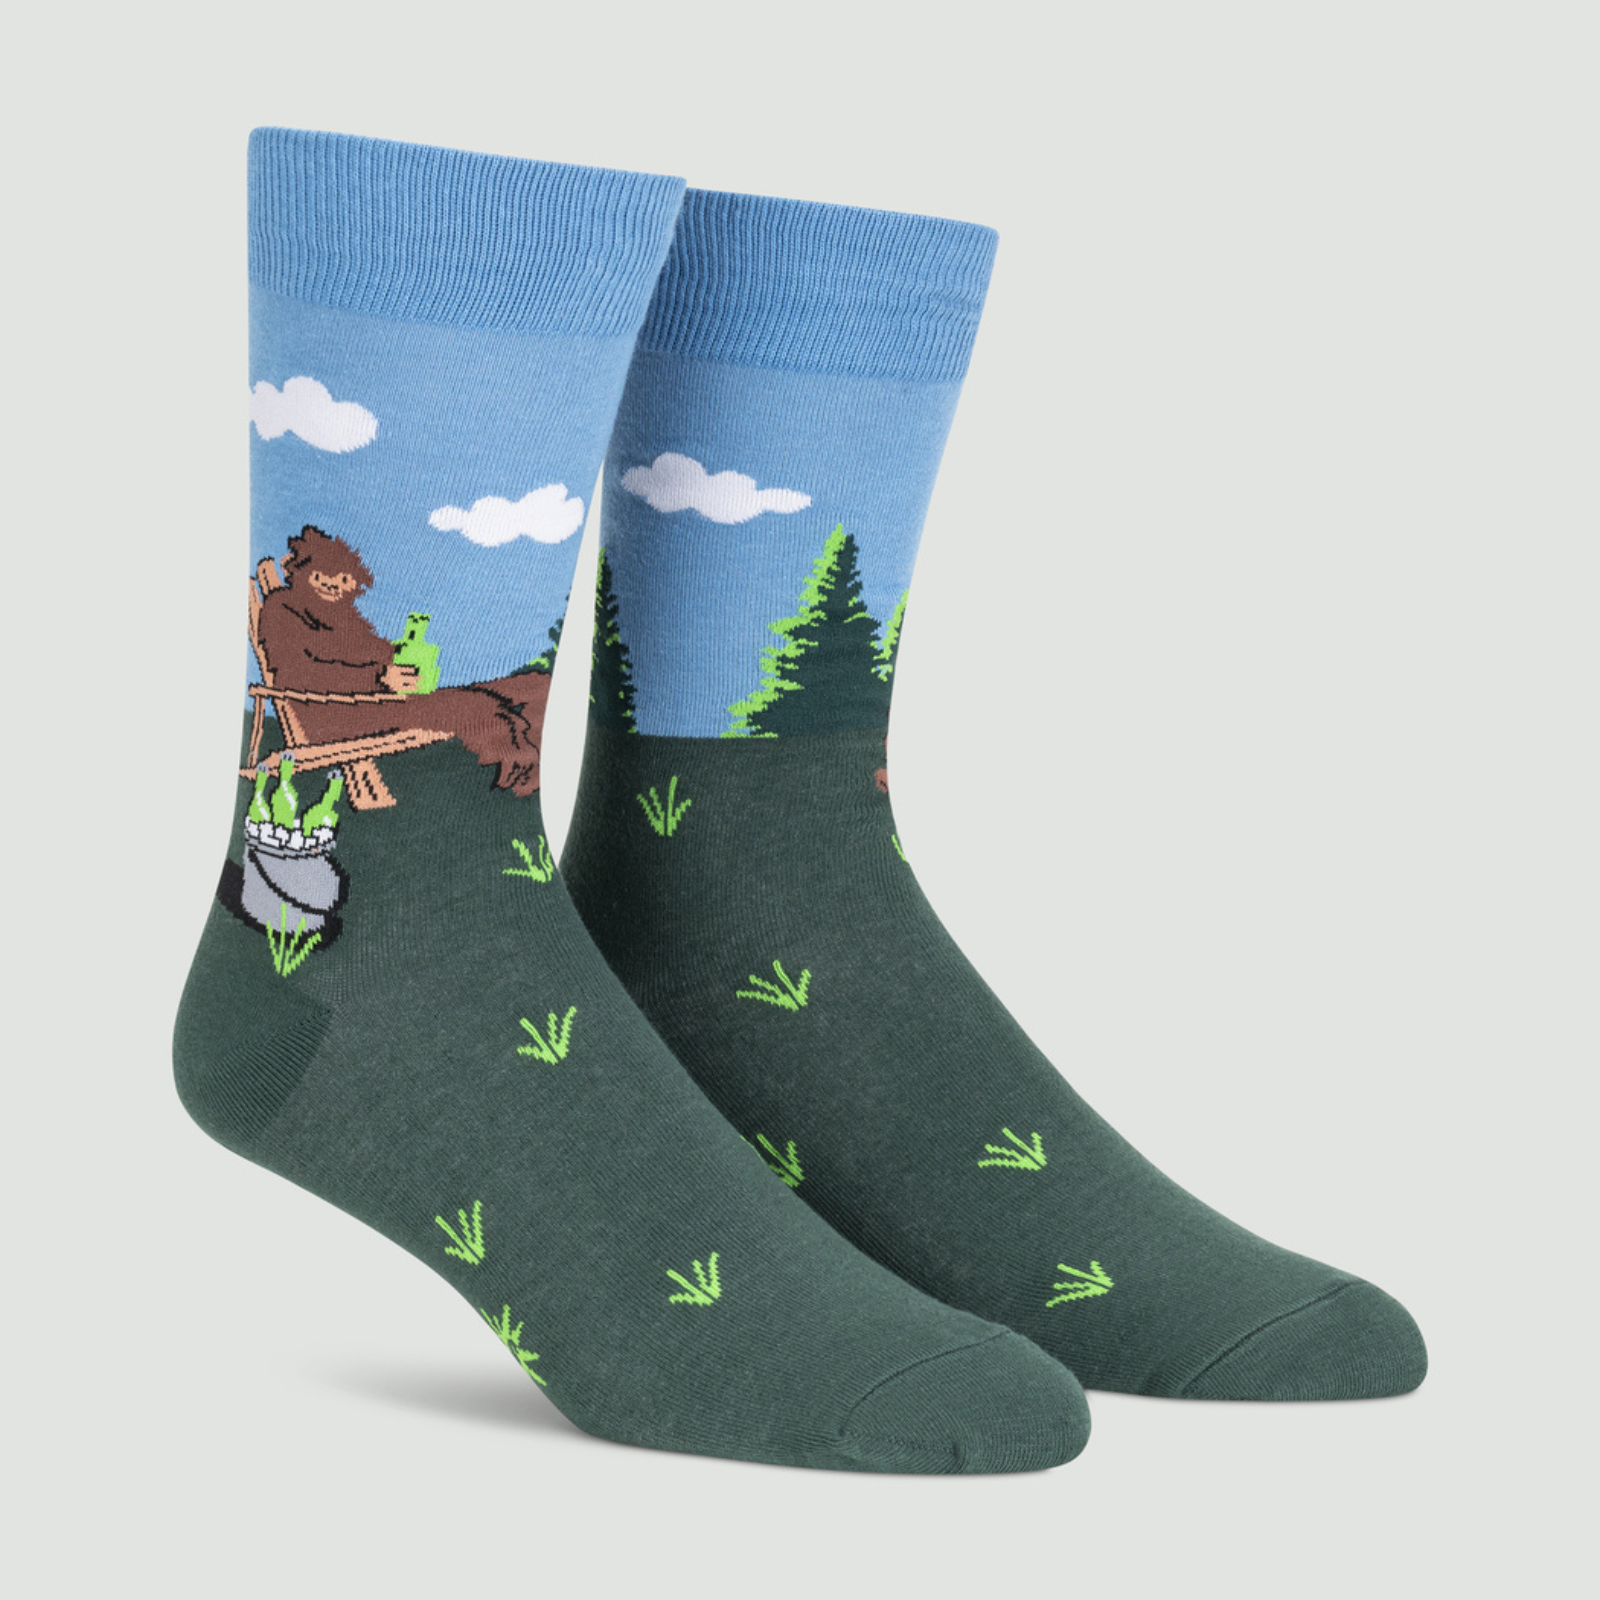 Sock It To Me Bucket List men's crew sock featuring Sasquatch sitting on a lawn in a chair drinking beer with a bucket of beer shown on display feet